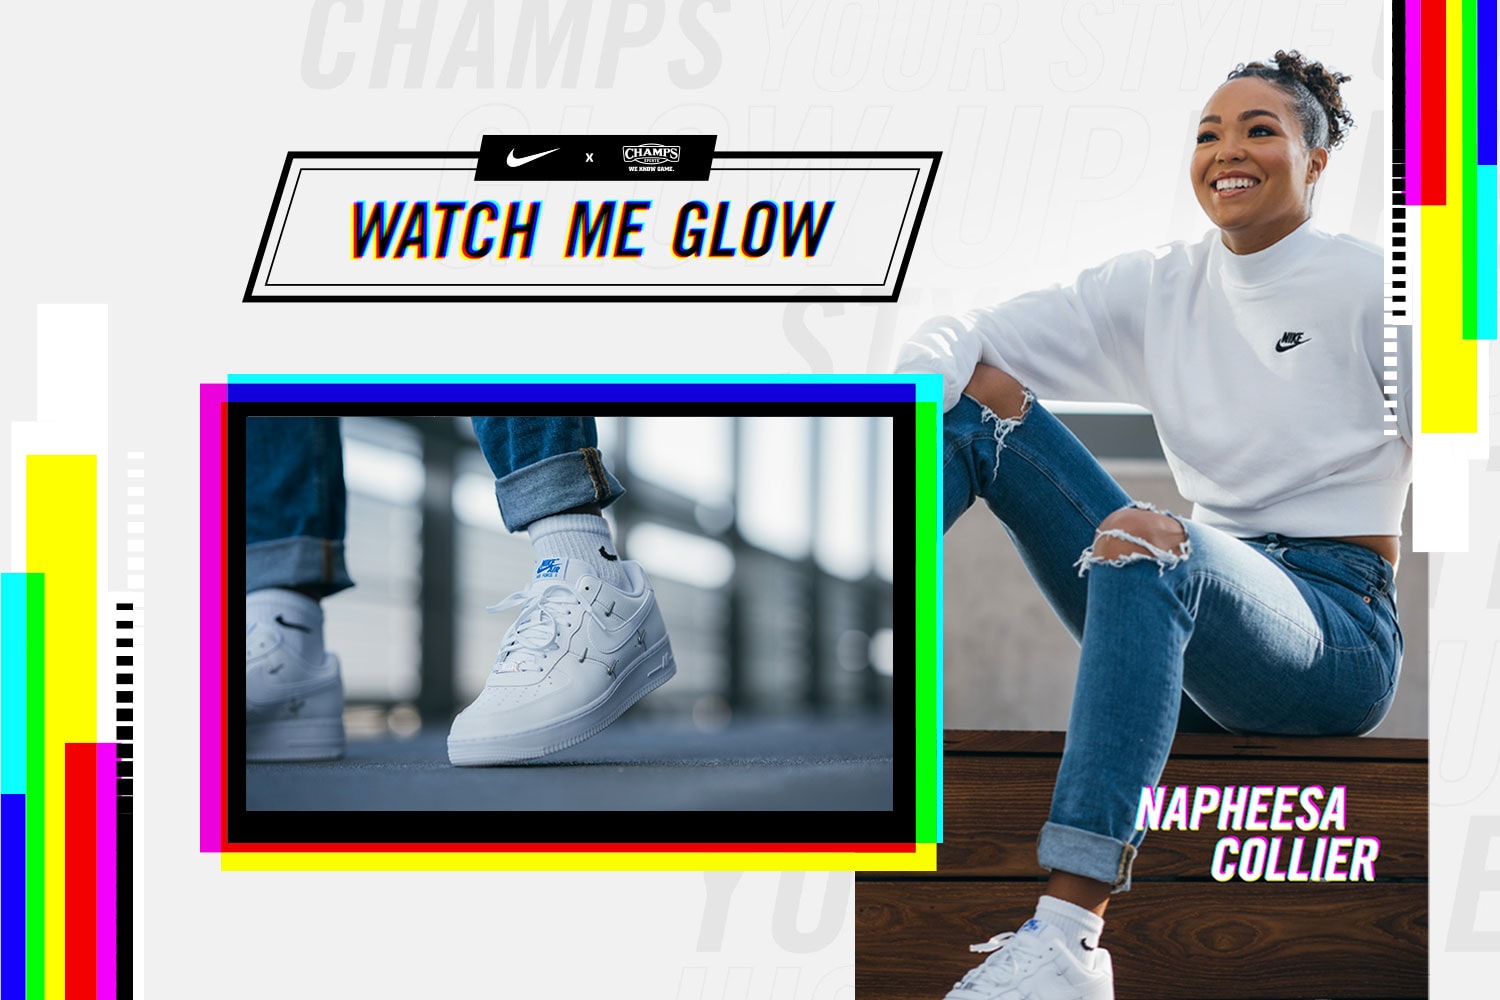 champs sports nike watch me glow female basketball players campaign 